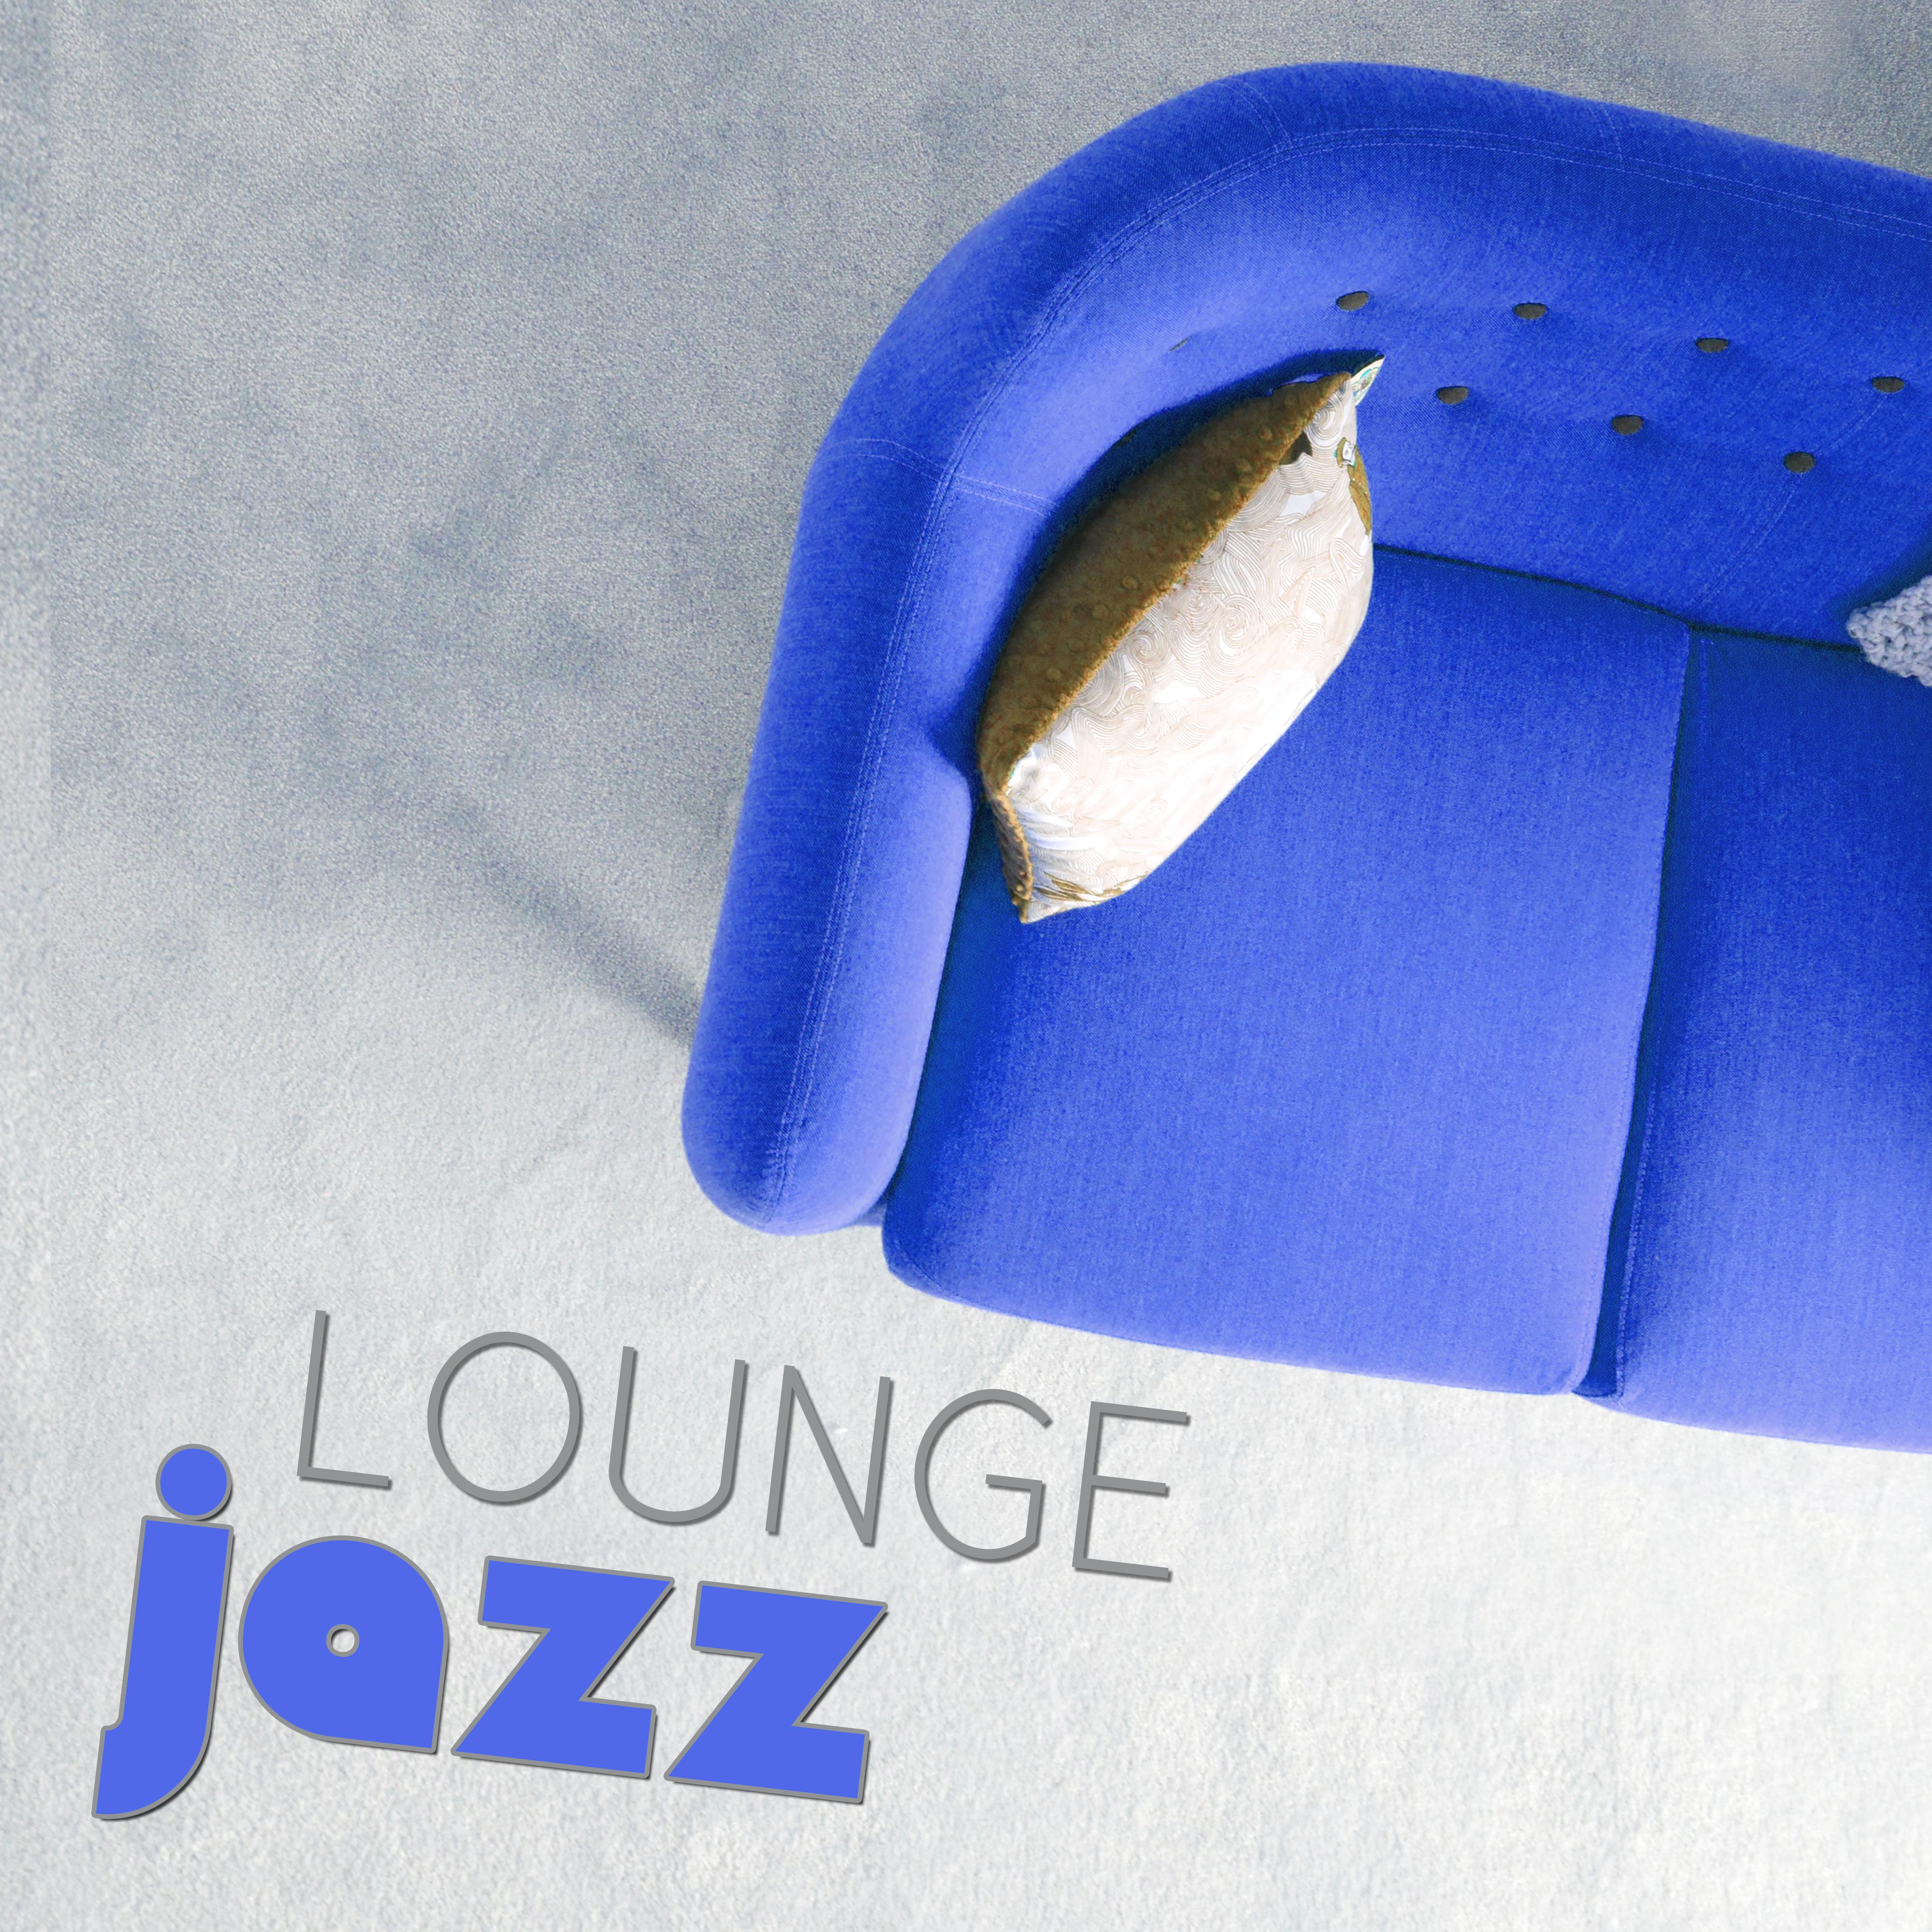 Lounge Jazz  Calming Jazz Music, Peaceful Guitar Piano Jazz Music, Relaxation Music, Best Background for Shopping Center, Waiting Room  Cafe